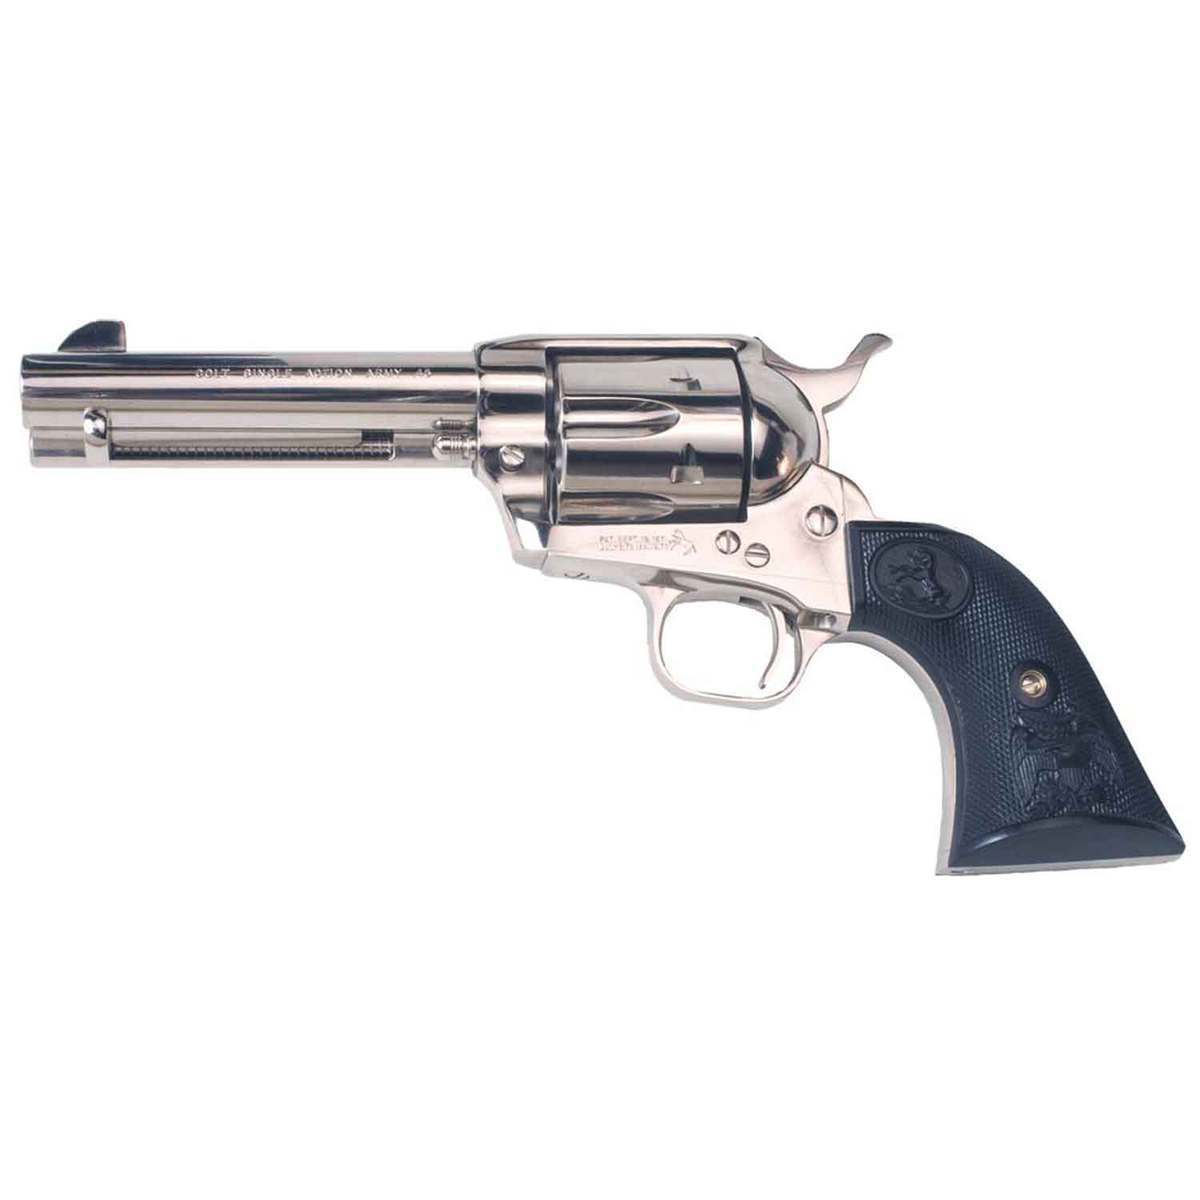 Buy Colt Single Action Army Peacemaker 357 Magnum 5.5in Nickel Revolver - 6 Rounds Online